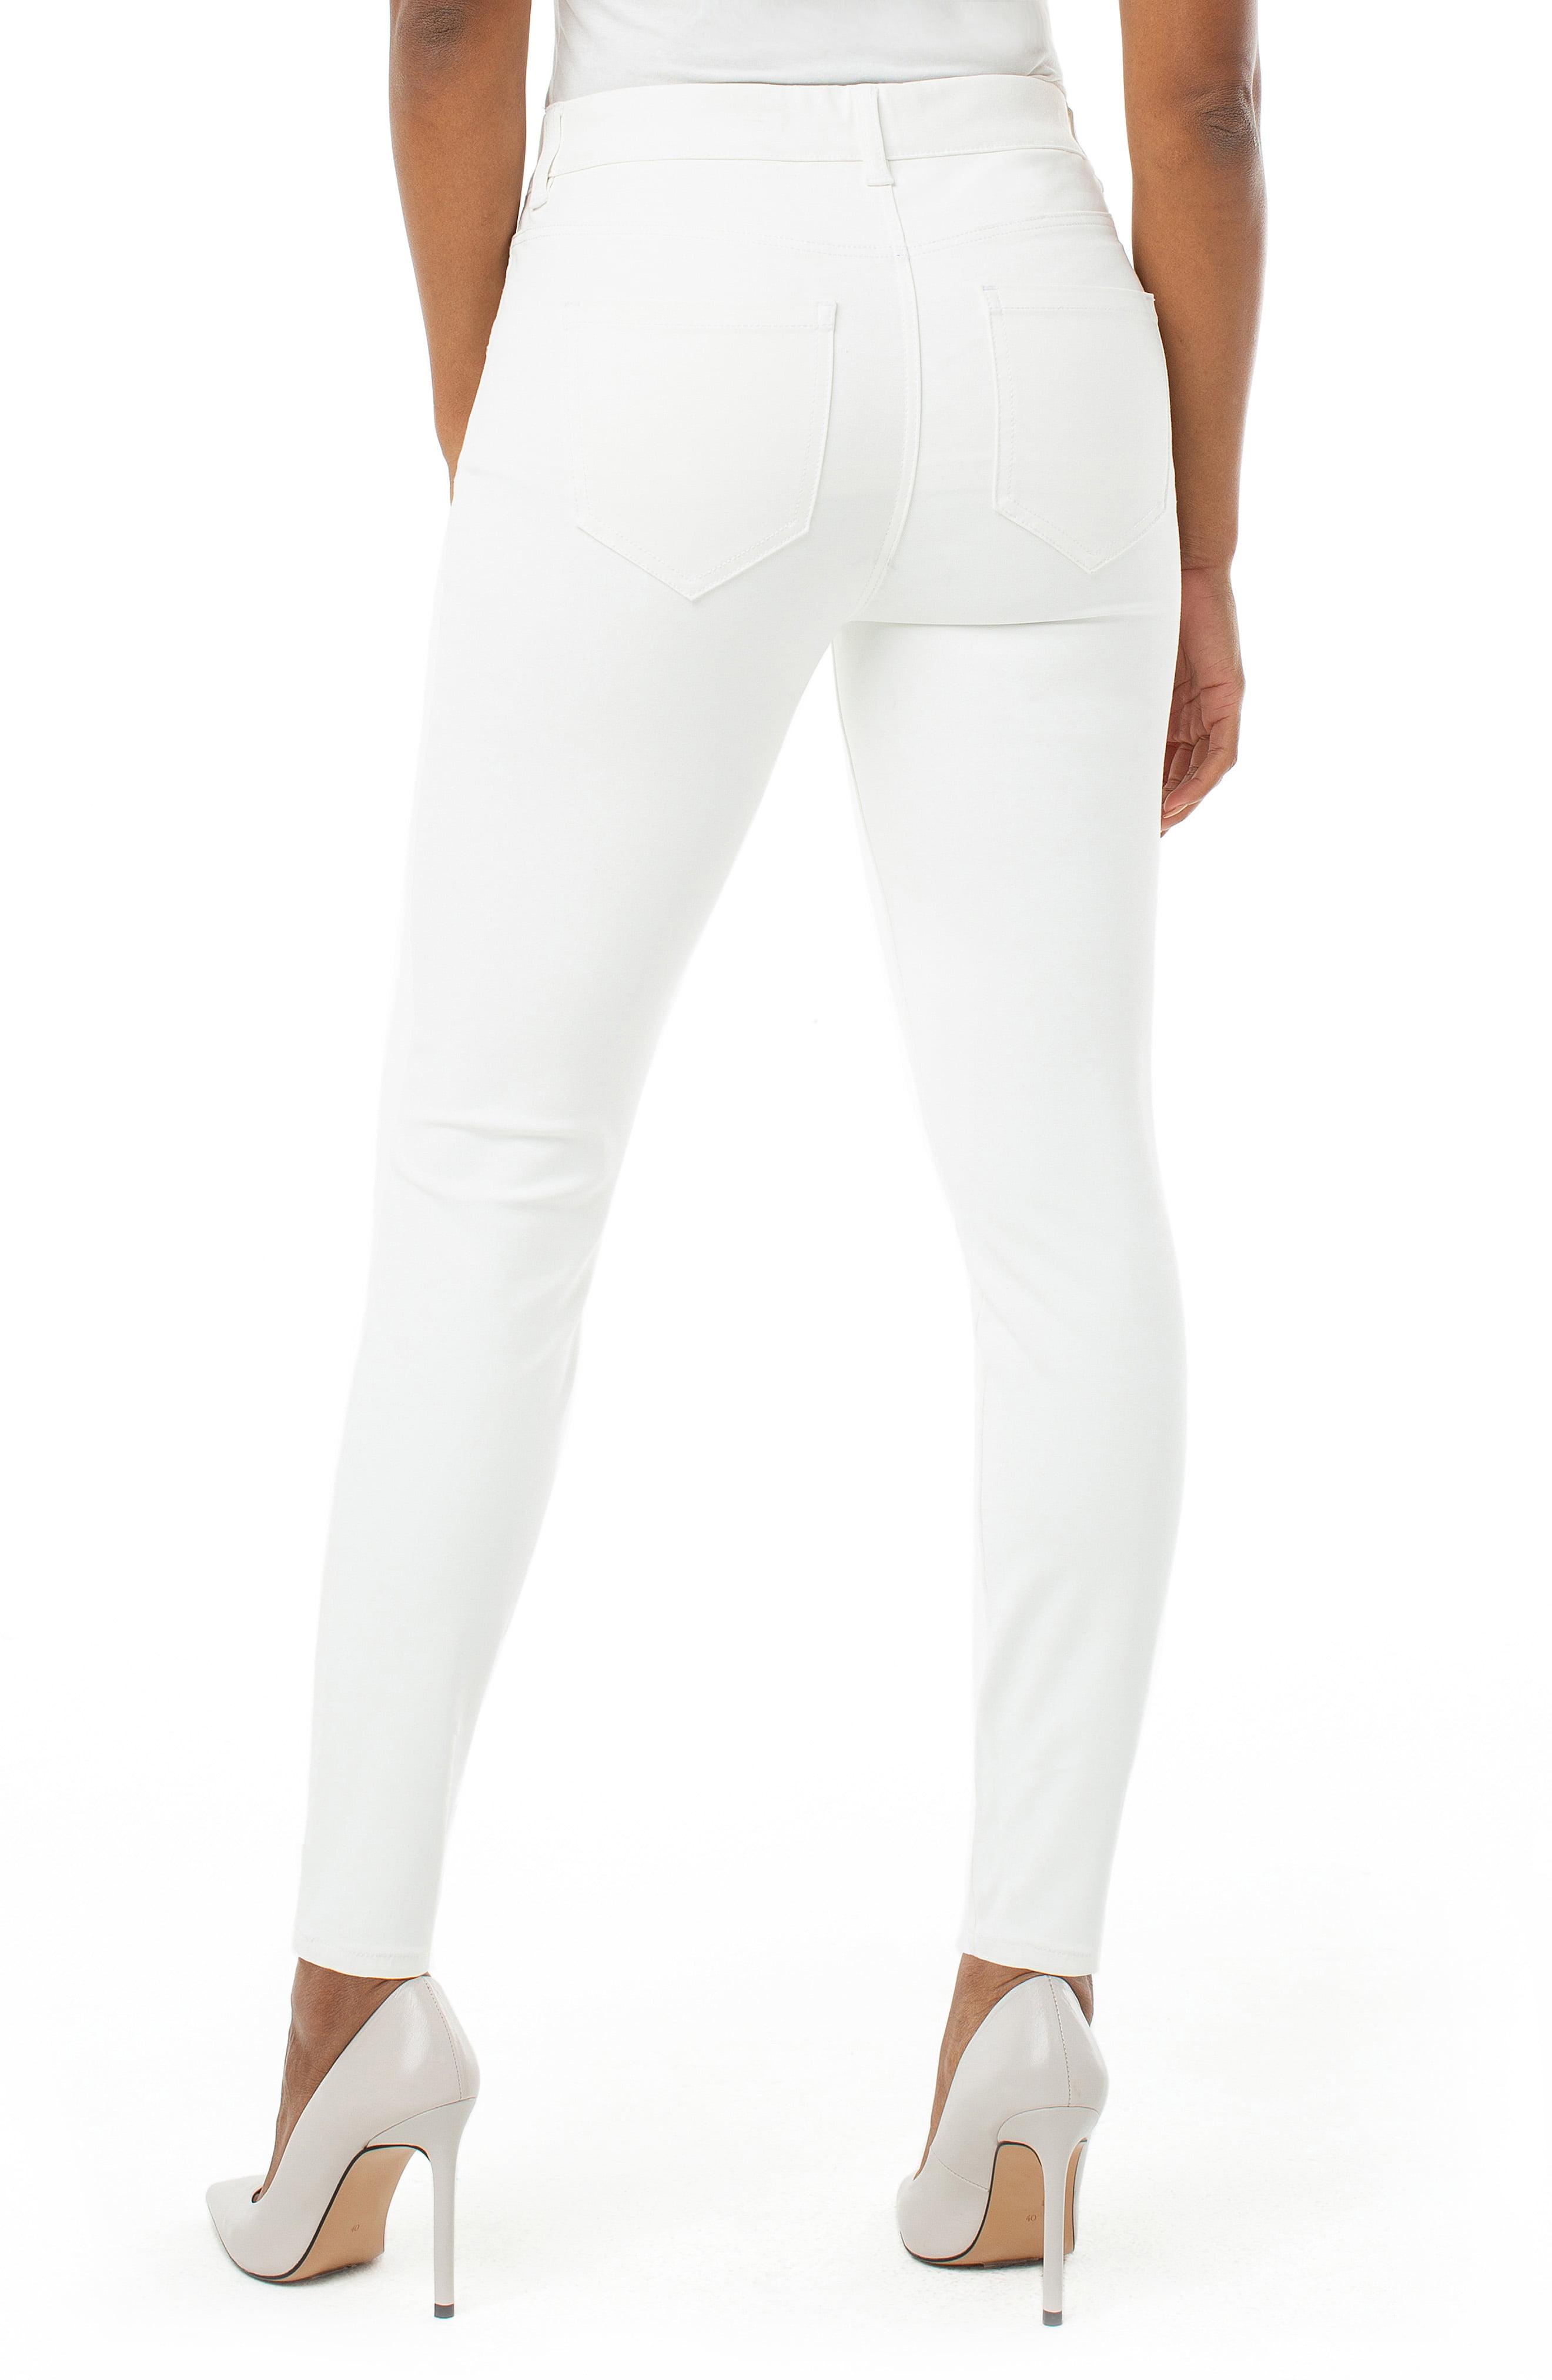 Liverpool Jeans Company Denim Gia Glider Skinny Pull-on Jeans in Bright ...